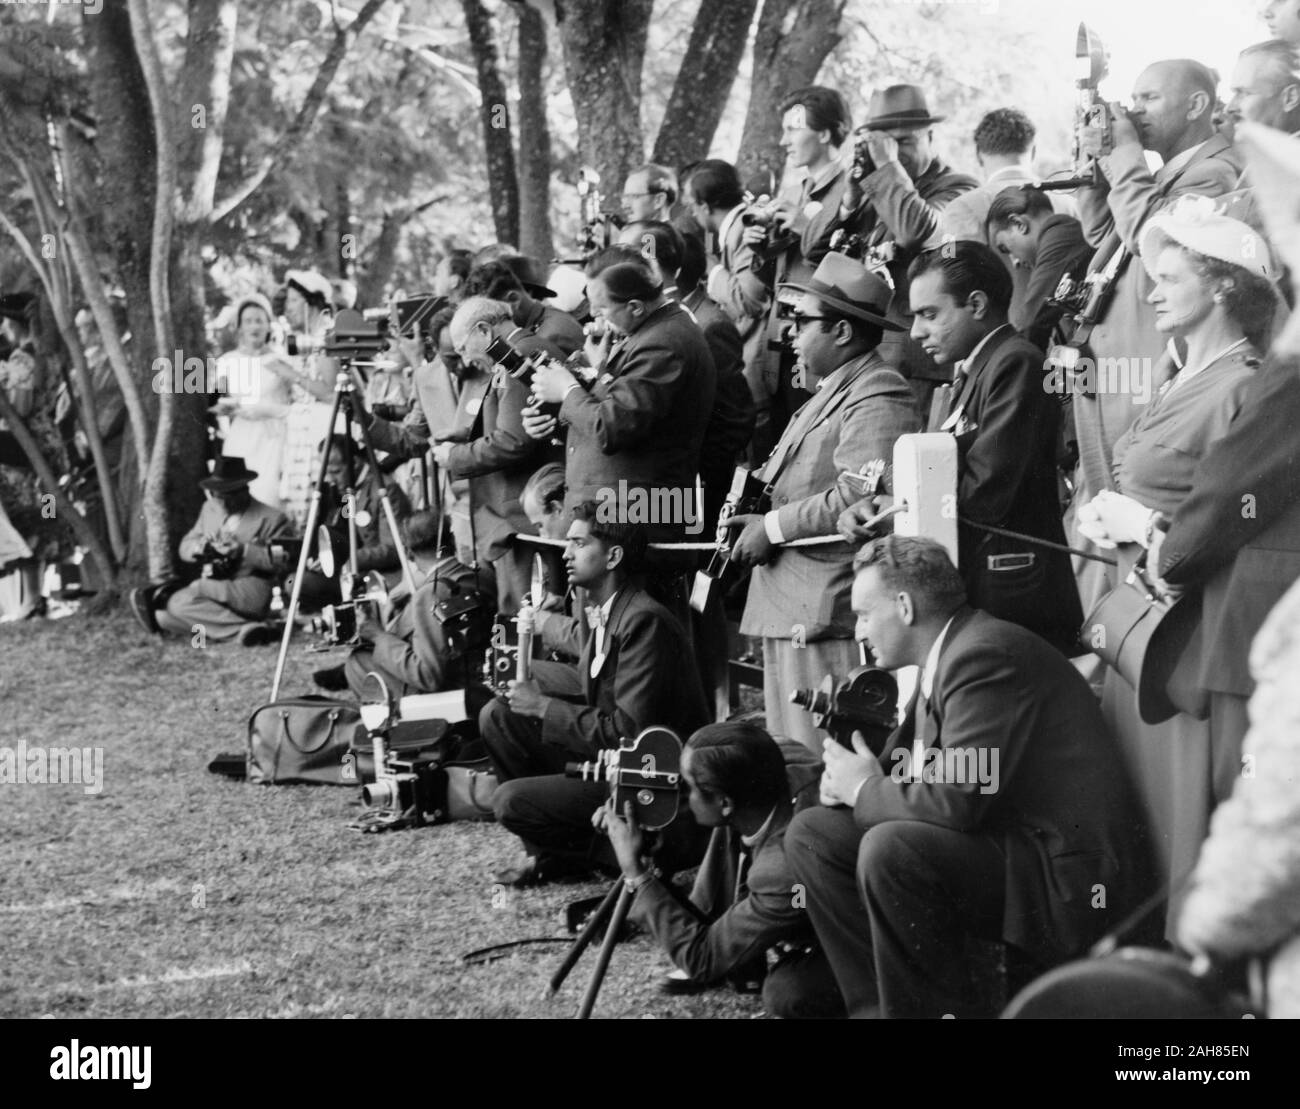 Kenya, Press photographers and journalists, both European and Asian, gather at a garden party at Government House, Nairobi, to take pictures of Princess Elizabeth and the Duke of Edinburgh, February 1952. 2001/090/1/4/1/18. Stock Photo